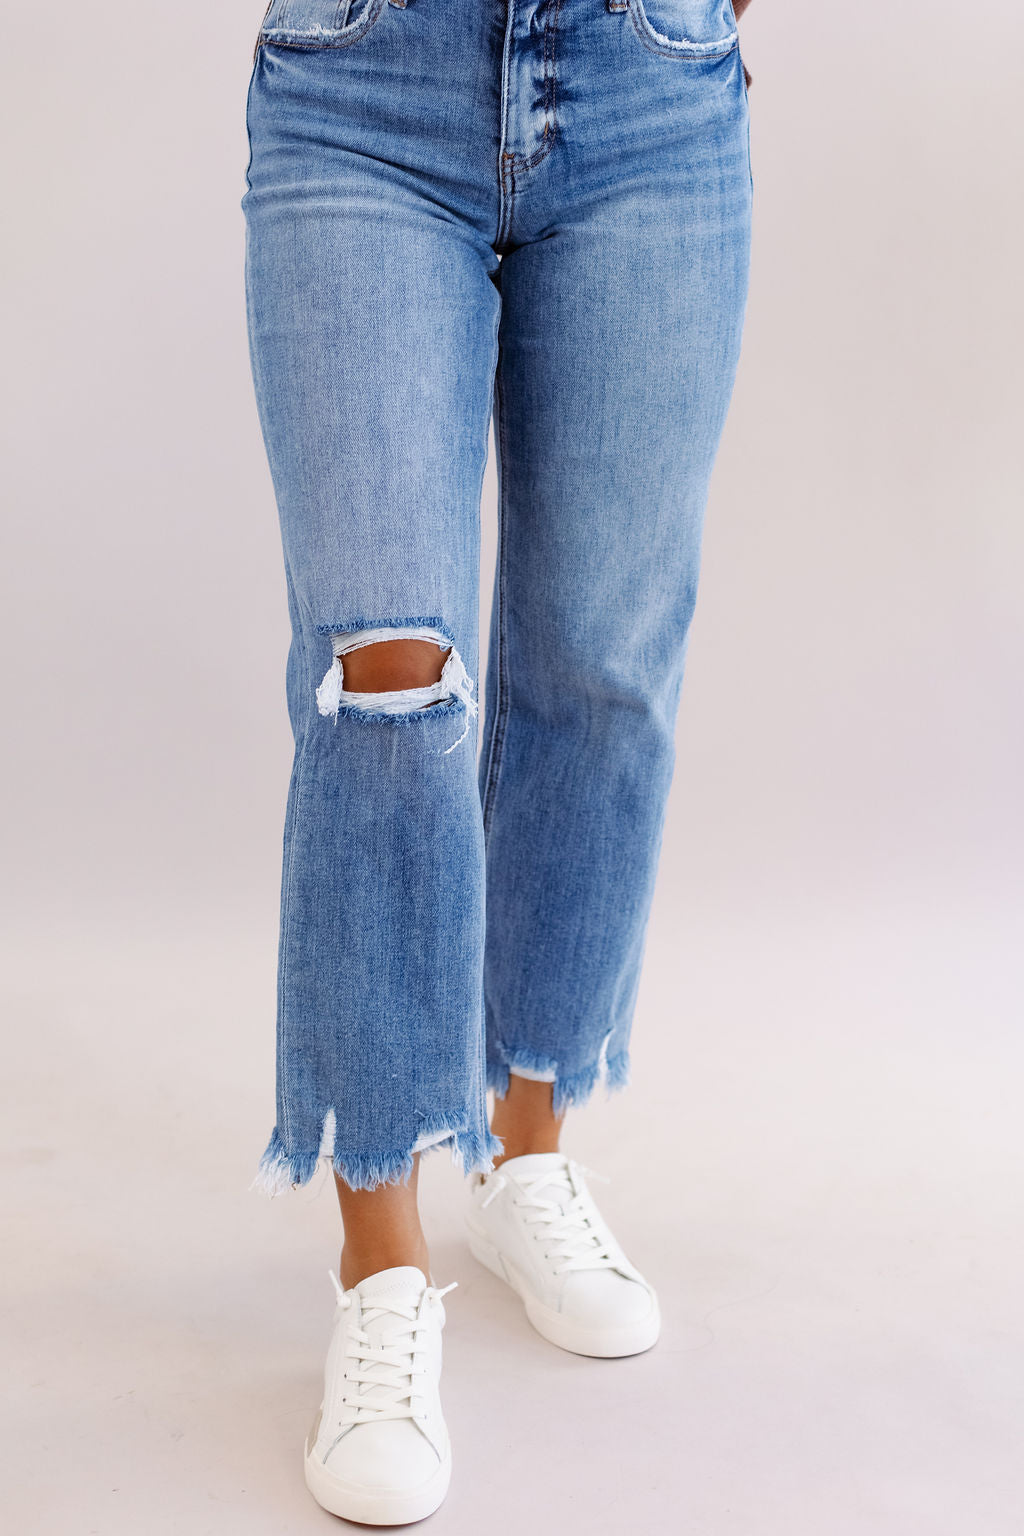 Georgia High Rise Dad Jeans - Poppy and Stella